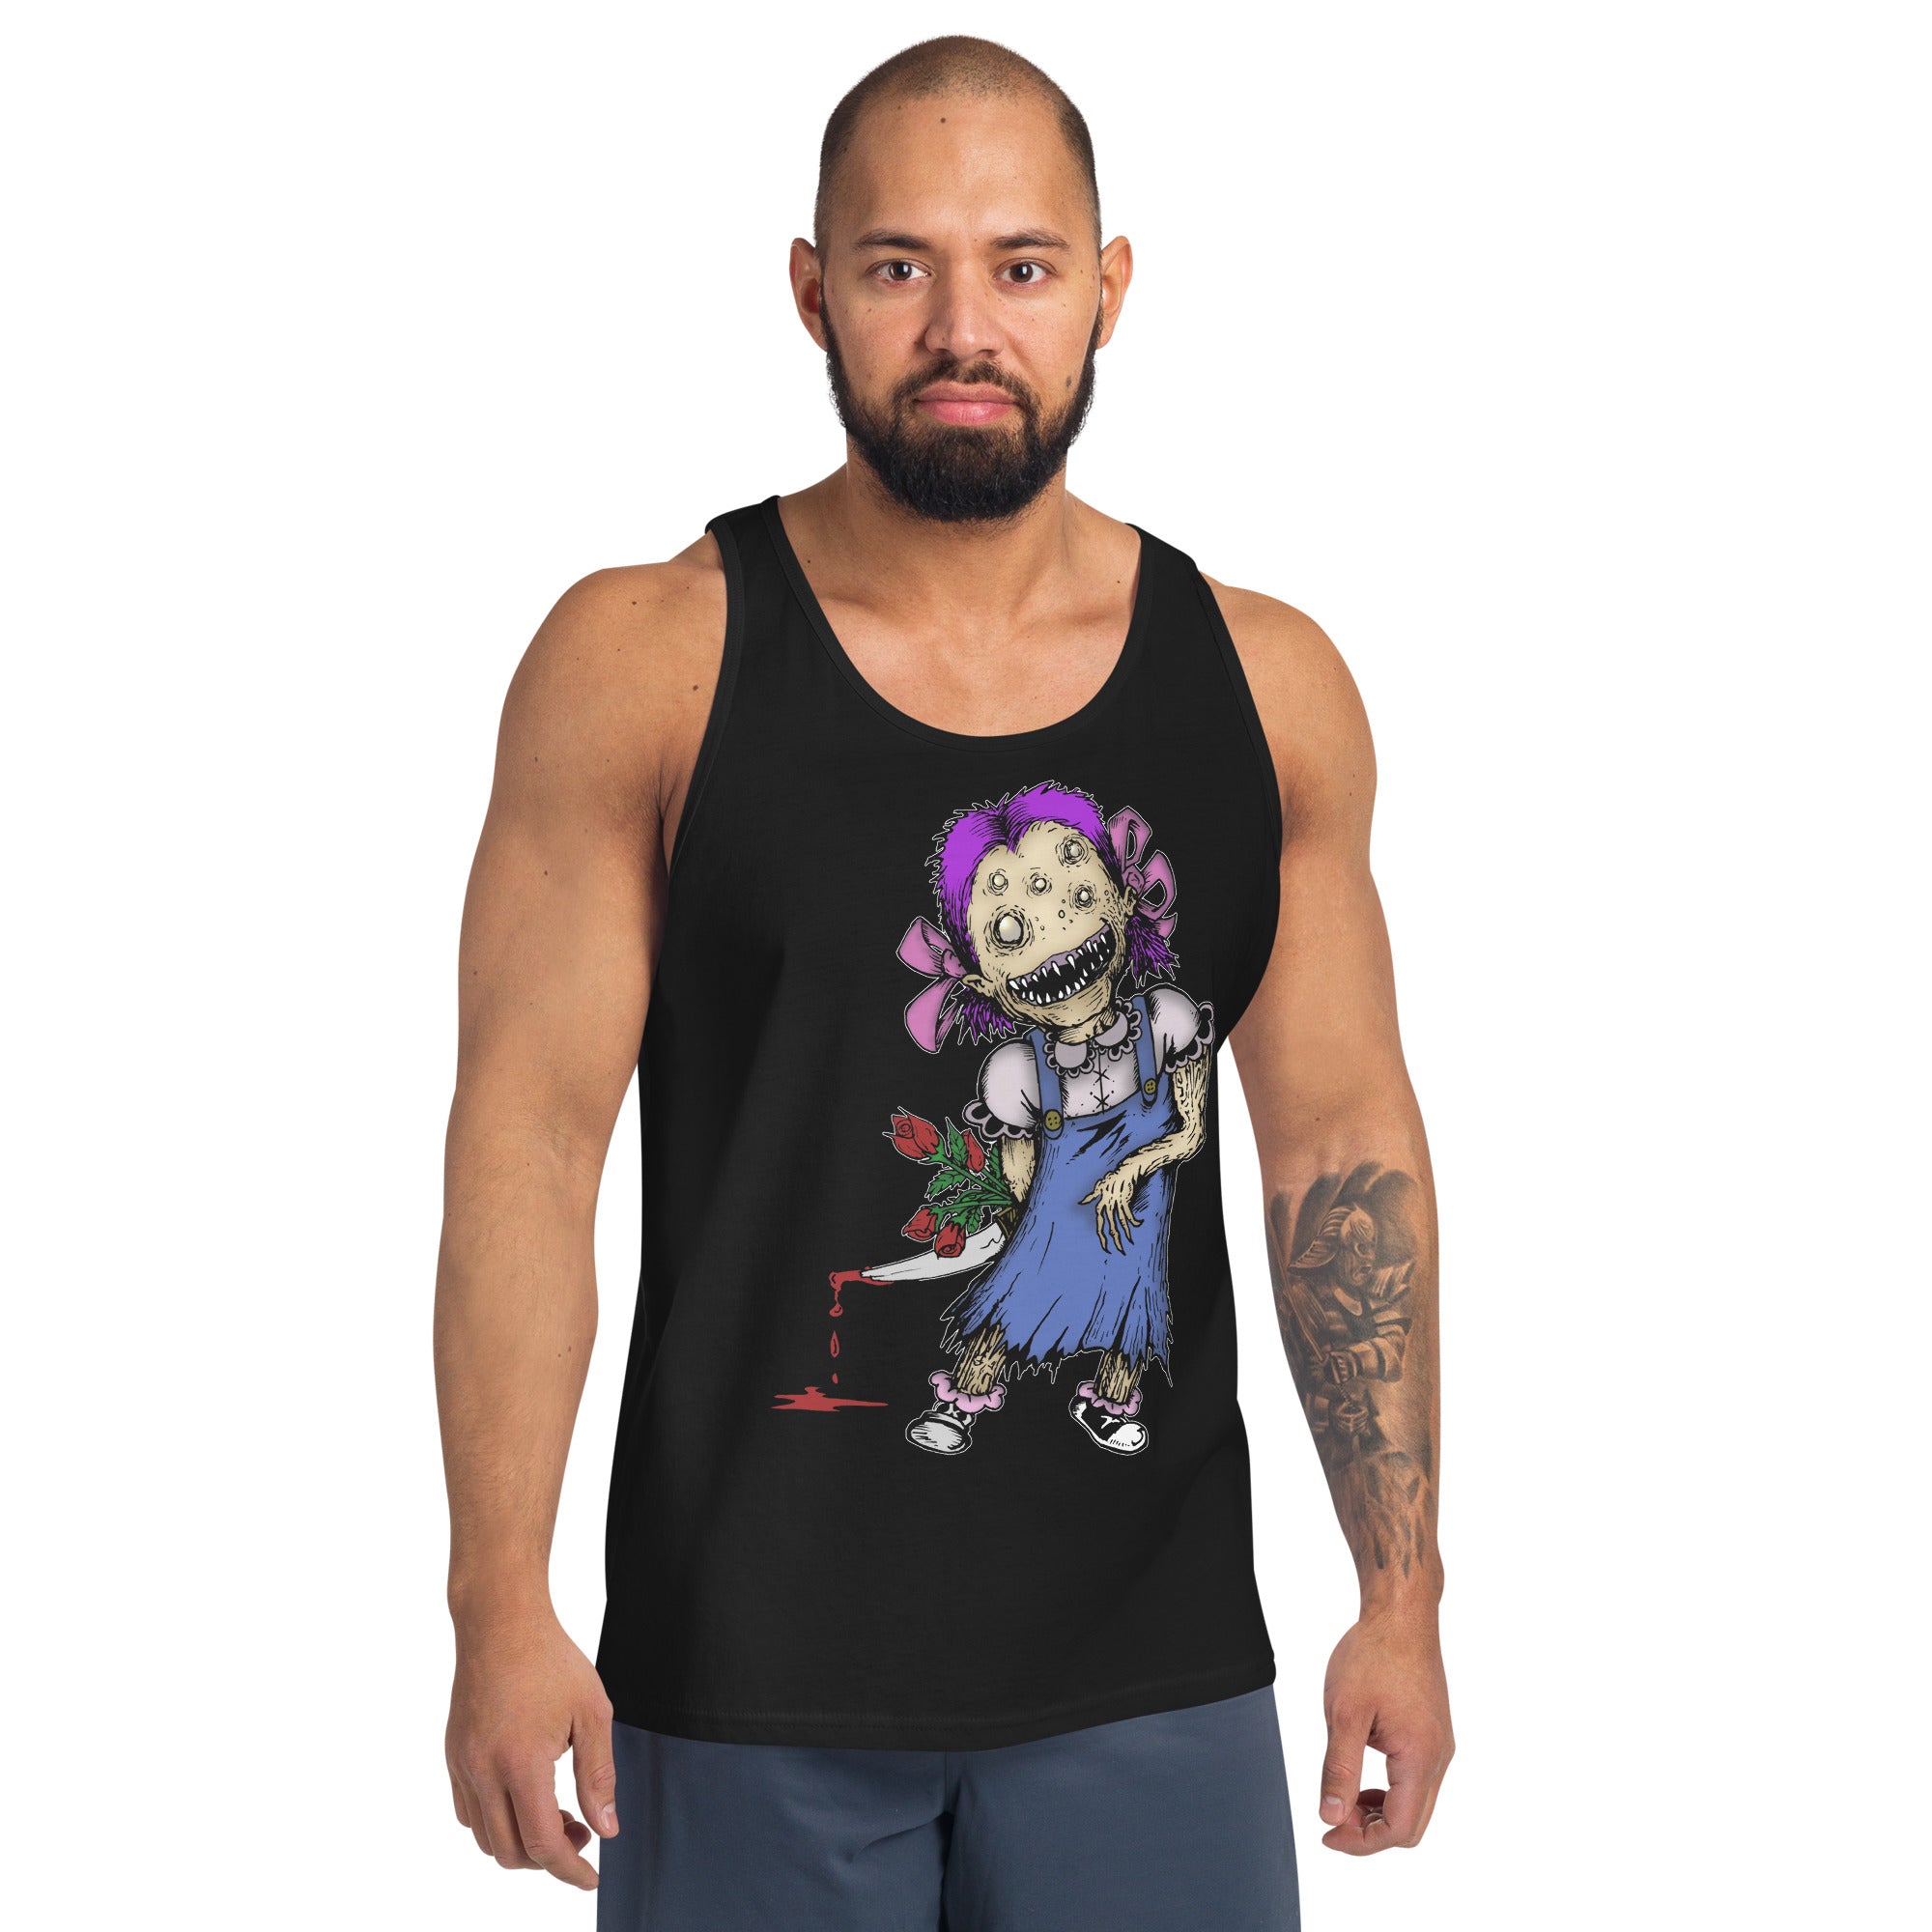 Wicked Little Girl with Bloody Knife Horror Style Men's Tank Top - Edge of Life Designs